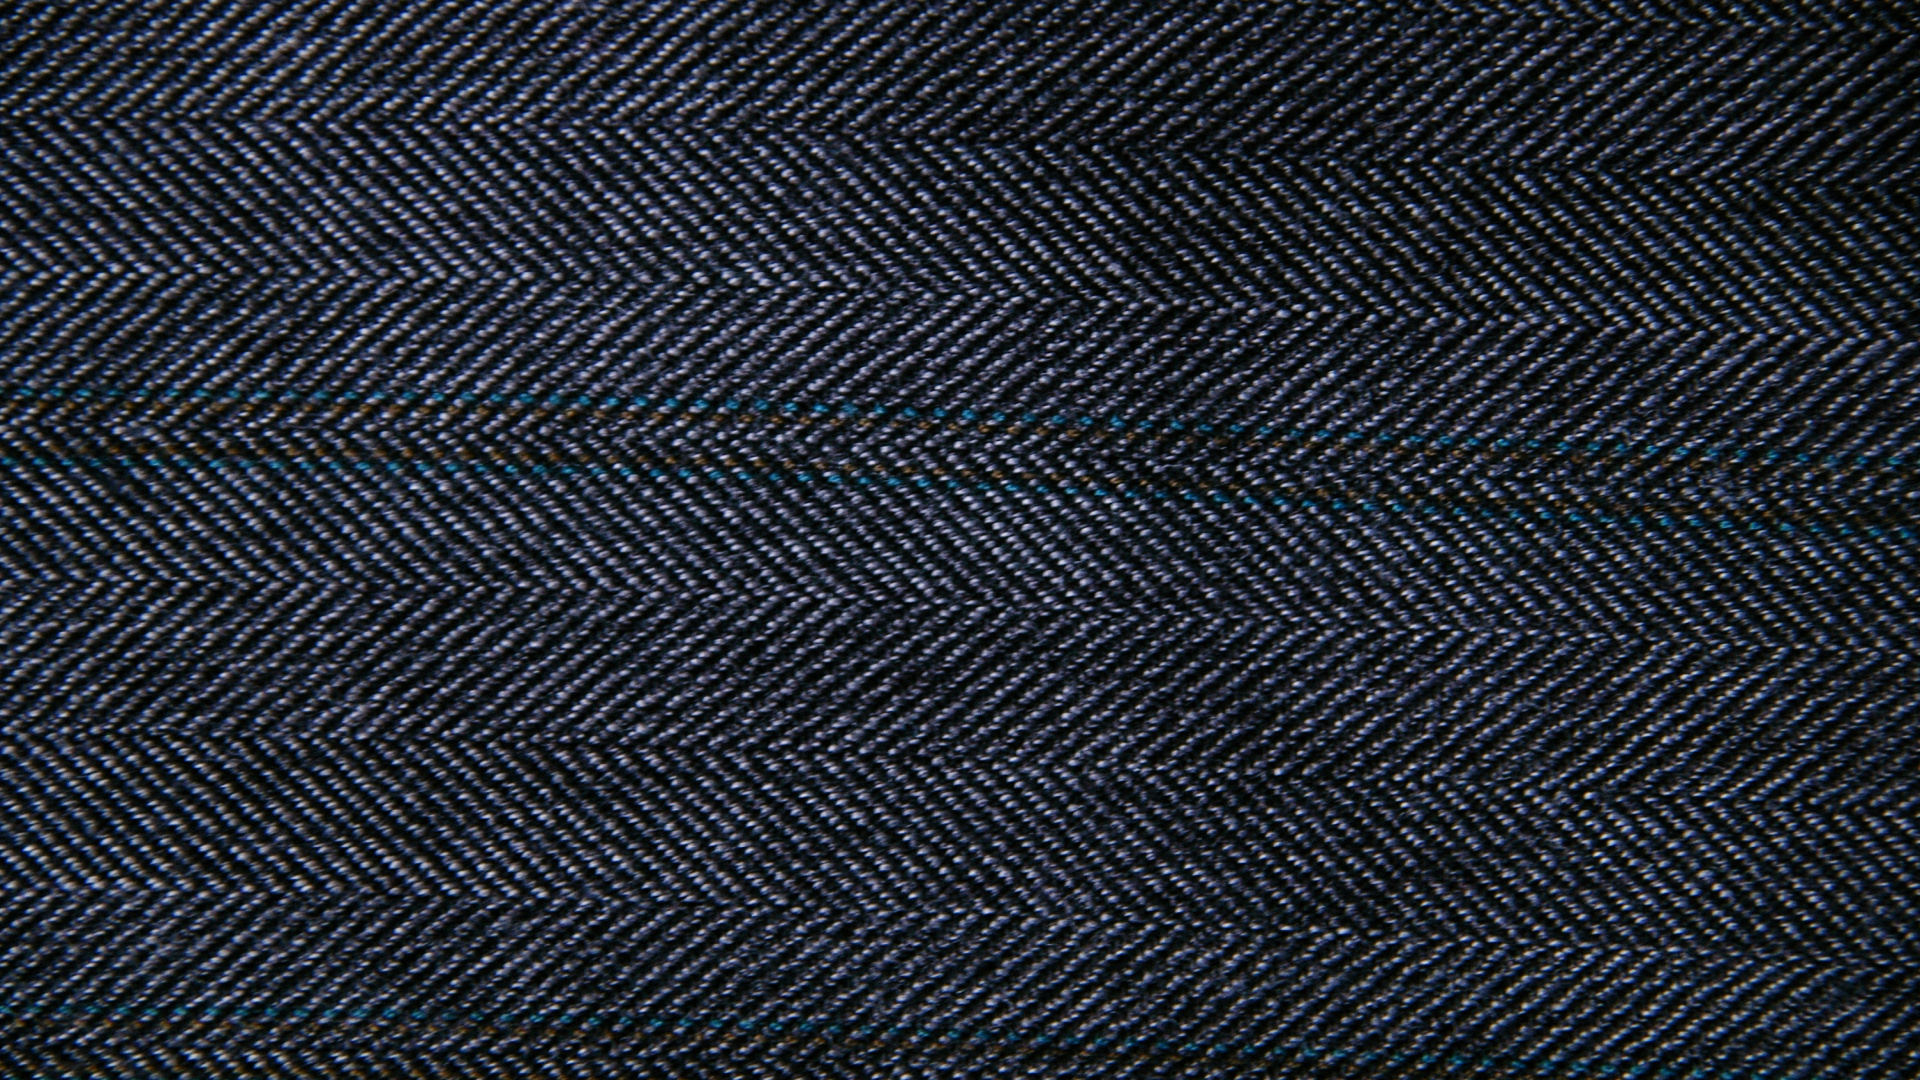 Black and White Striped Textile. Wallpaper in 1920x1080 Resolution